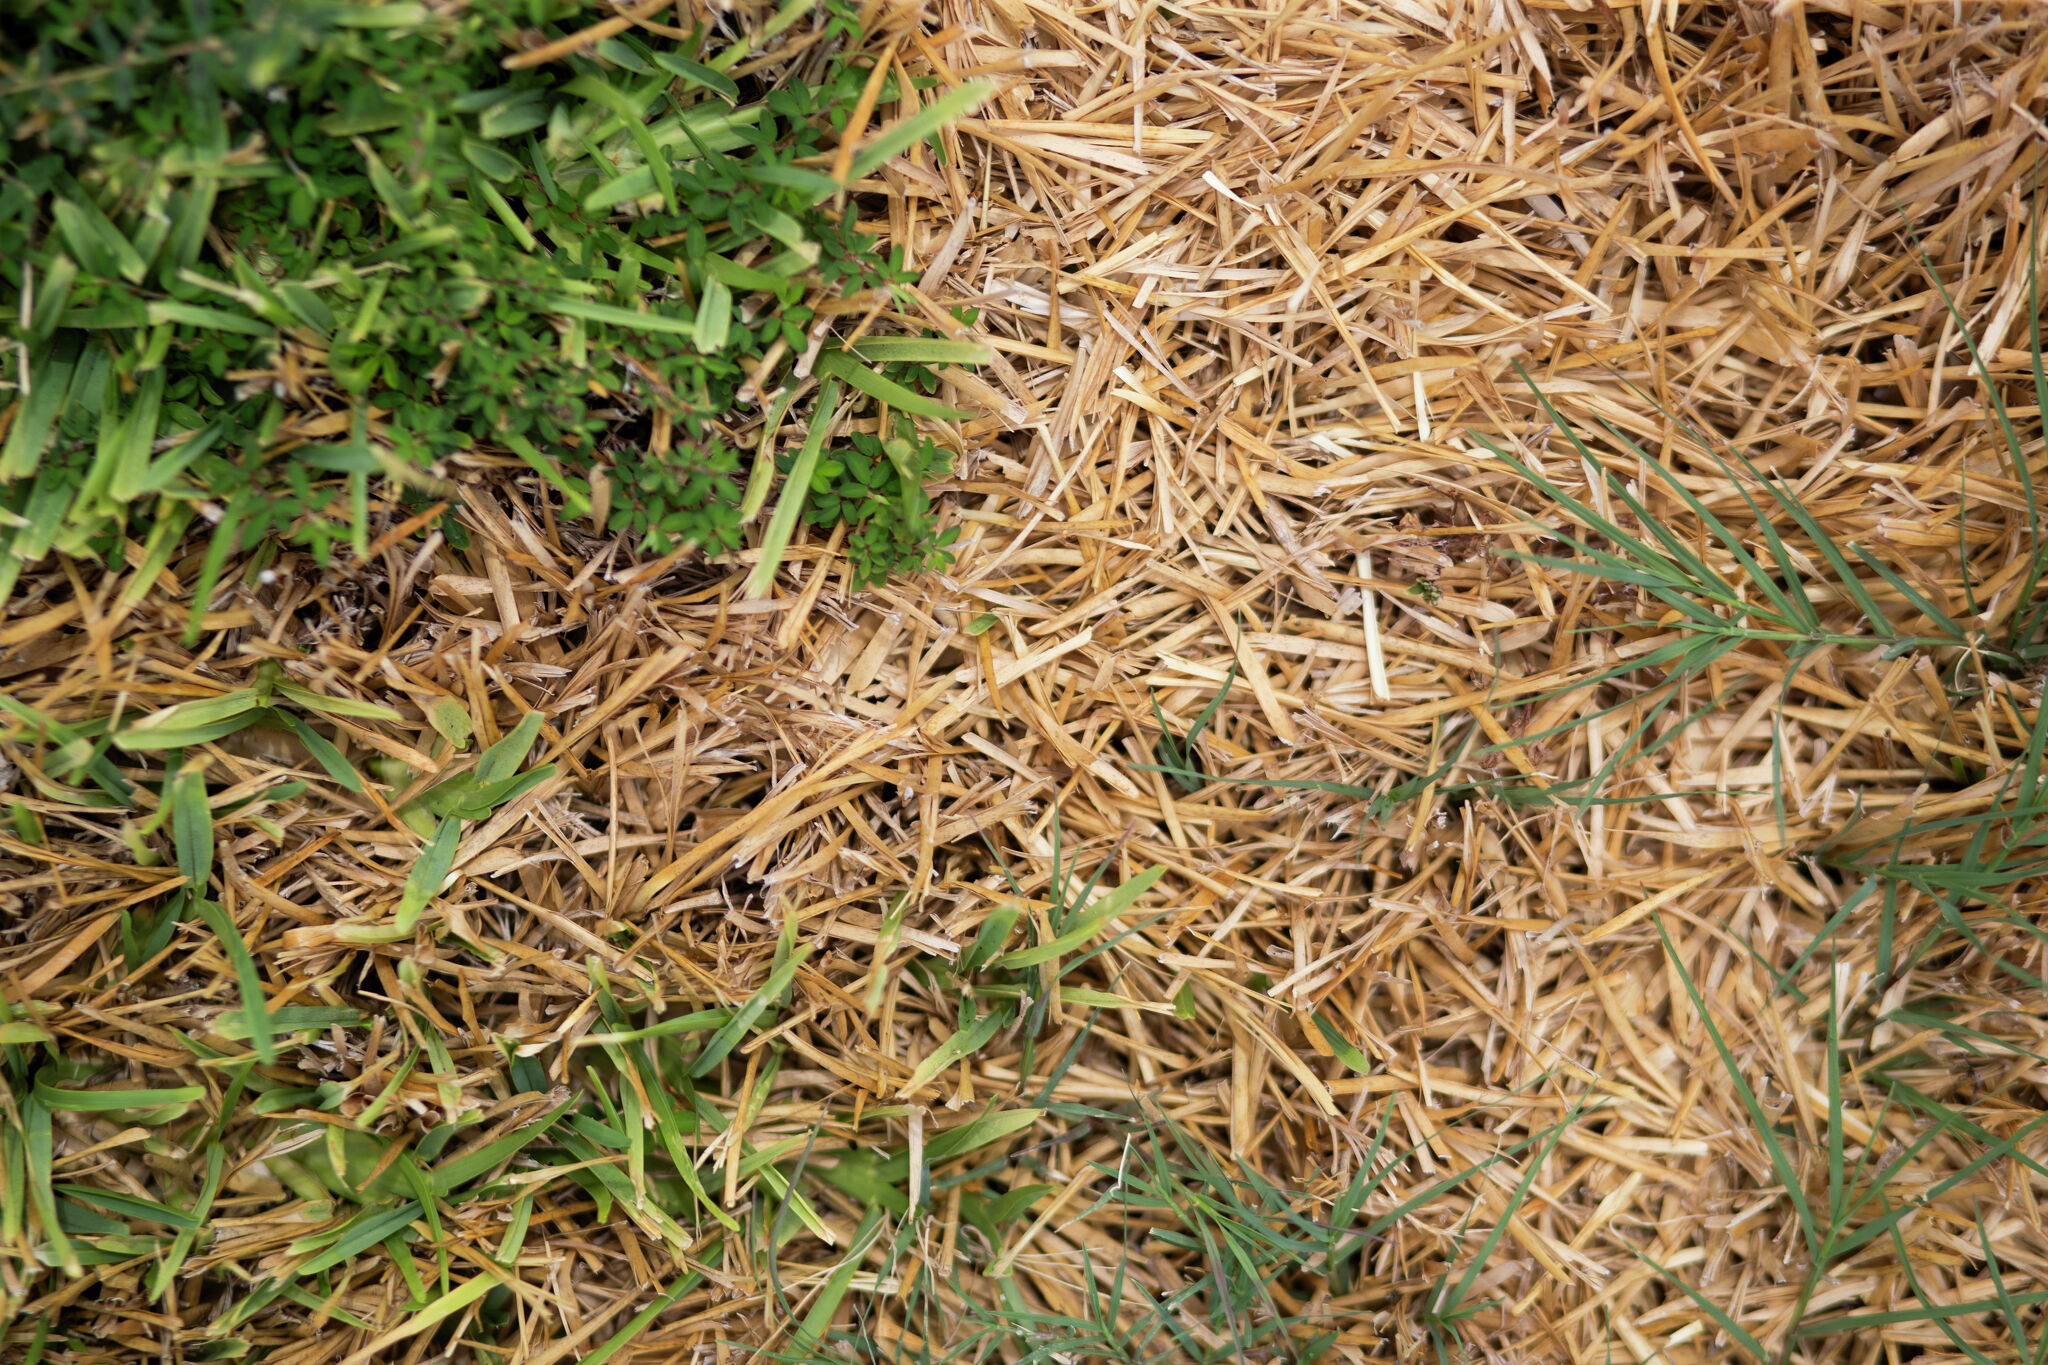 Anyone use straw on their lawns?